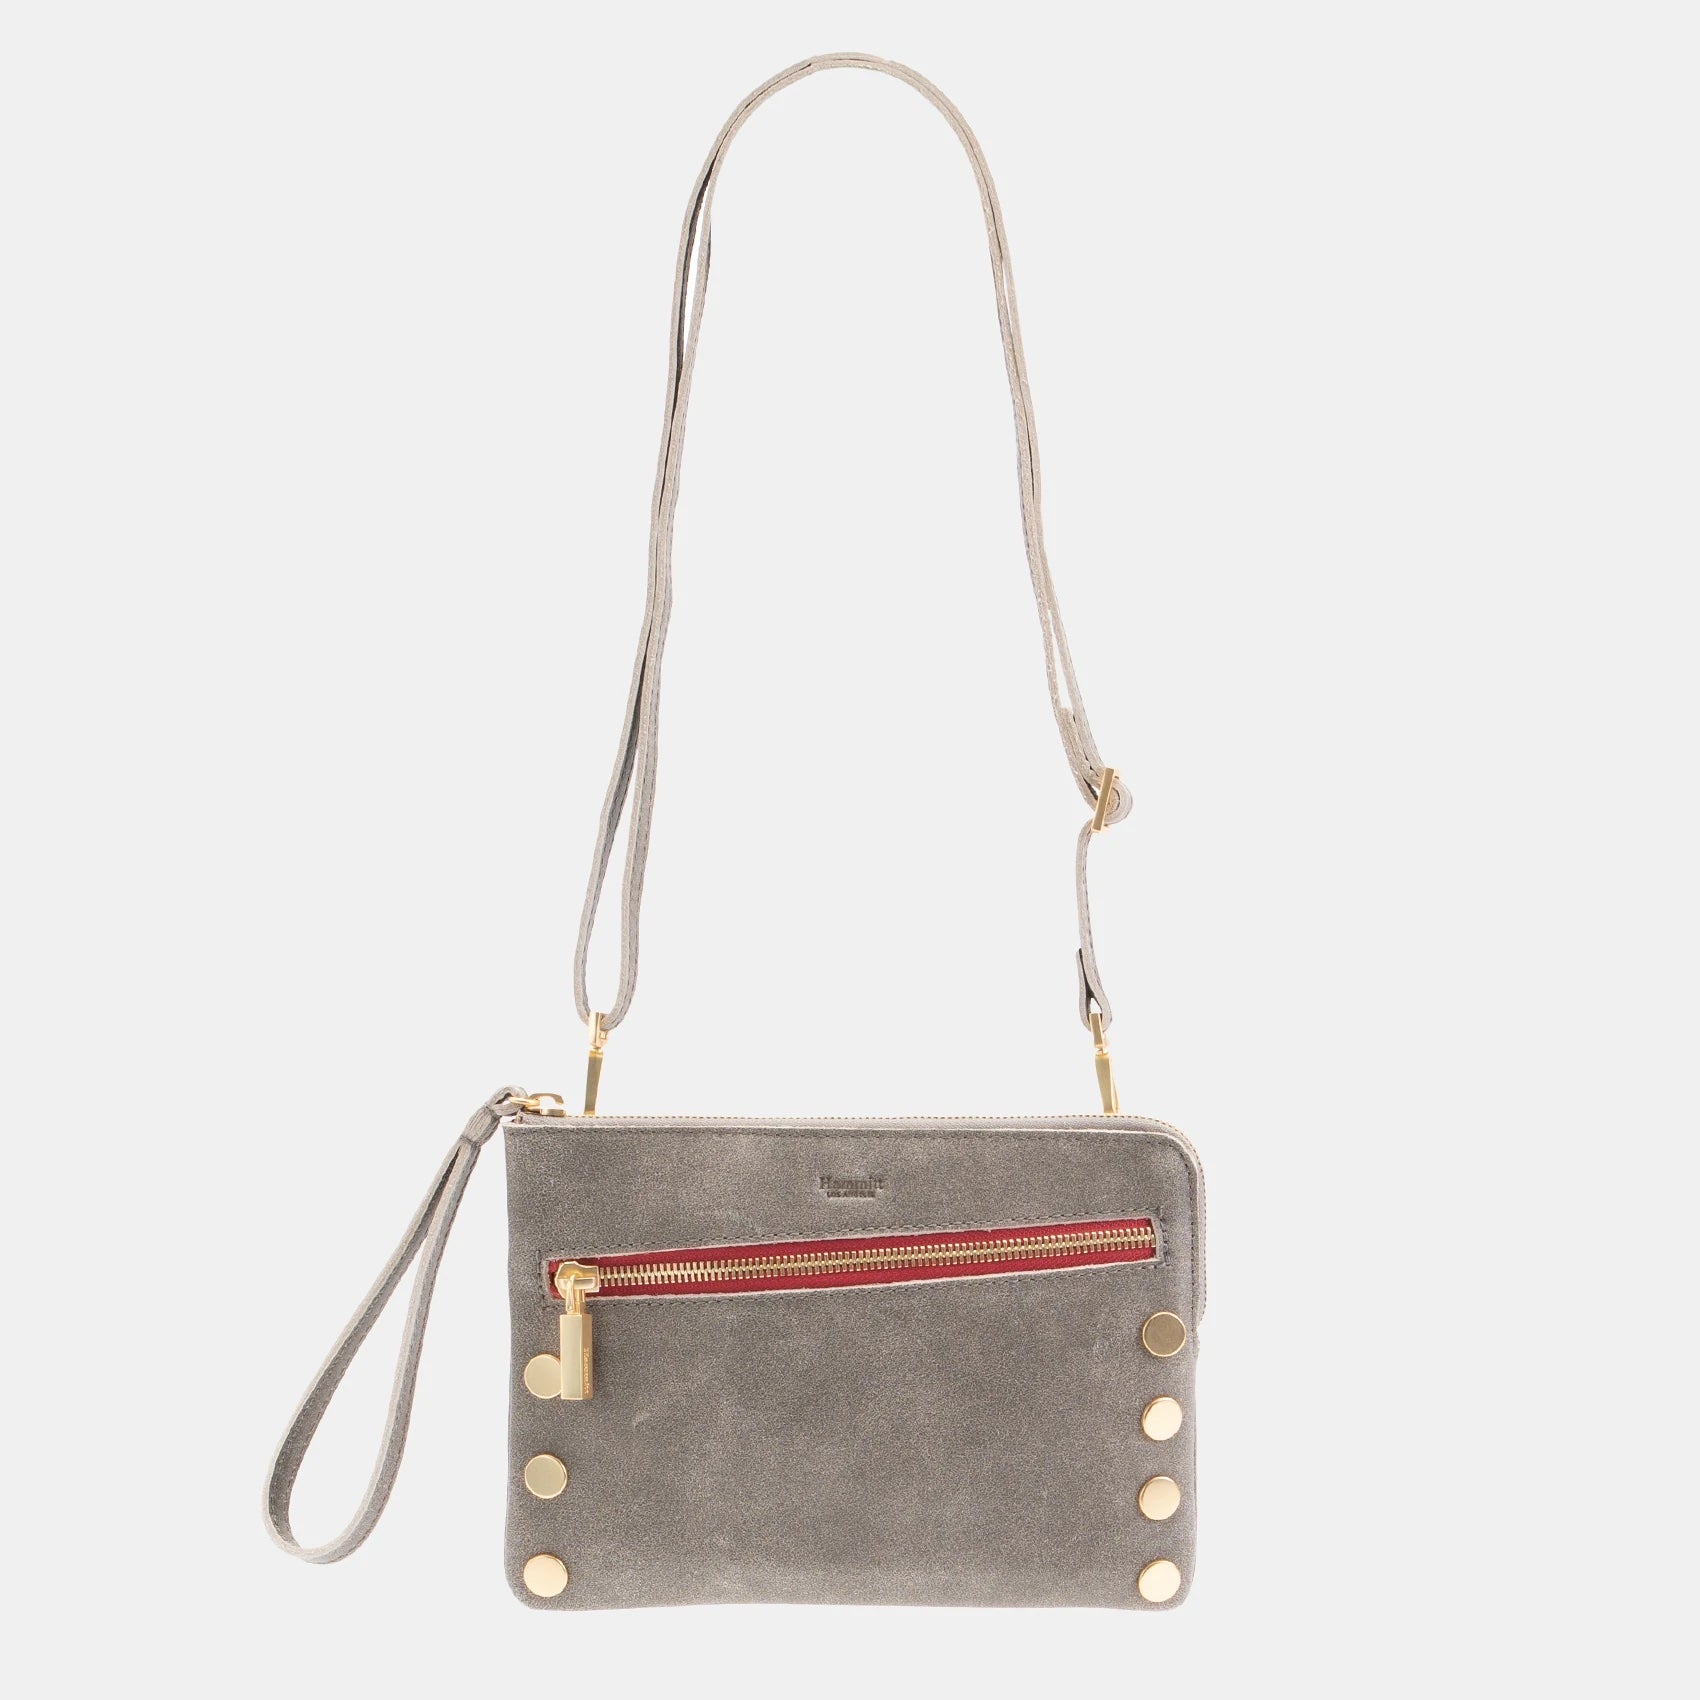 Hammitt Nash Small Crossbody Bag - Pewter/Brushed Gold with Red Zip